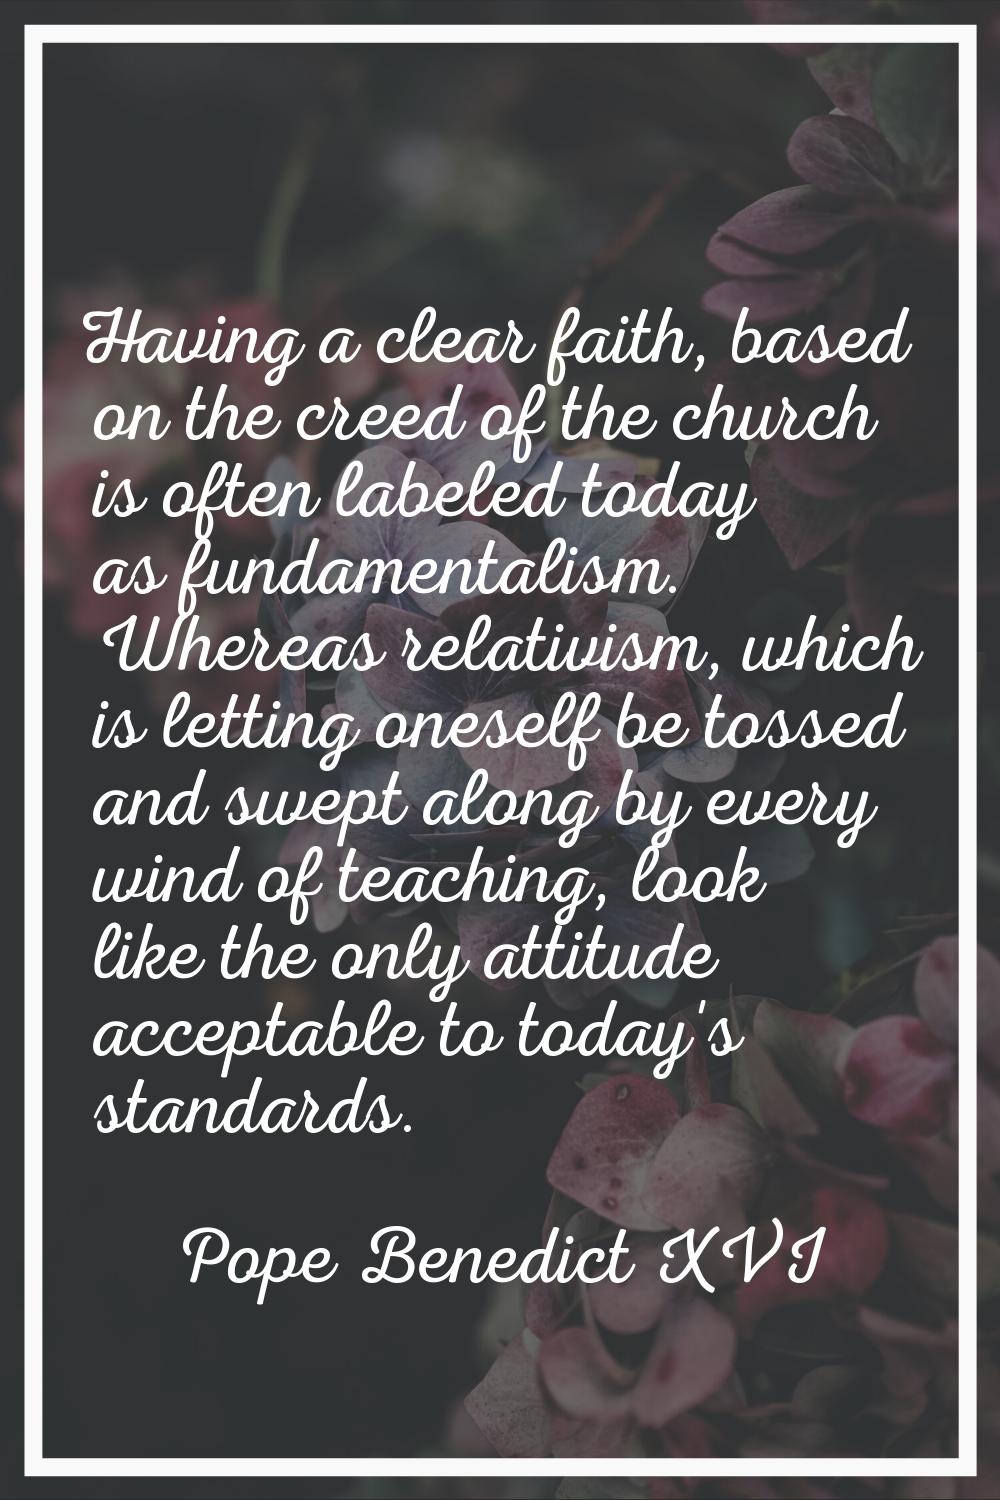 Having a clear faith, based on the creed of the church is often labeled today as fundamentalism. Wh